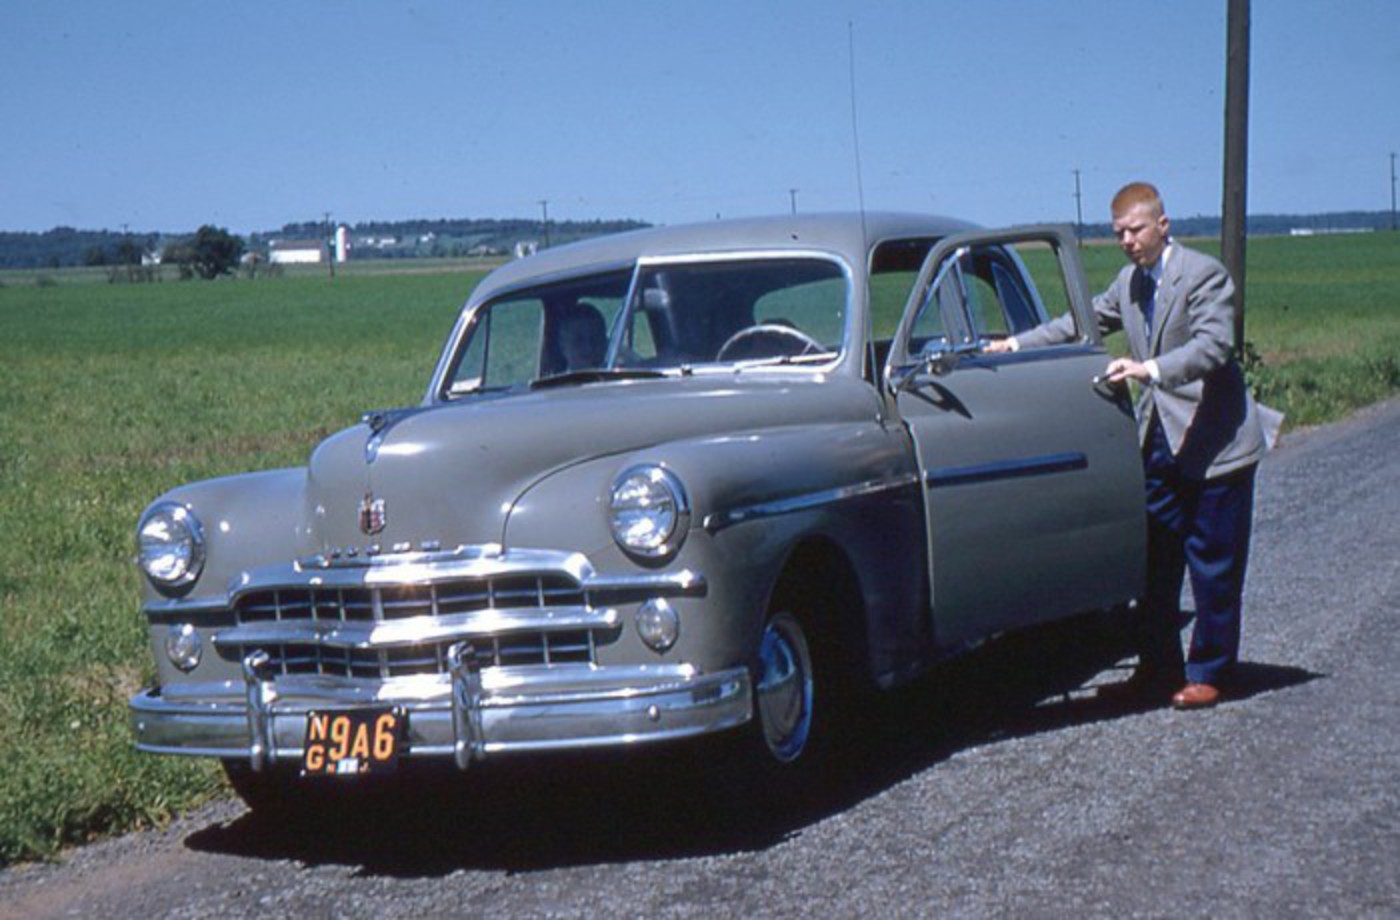 Driving America - My First Car - 1949 Dodge. I am standing by my first car,